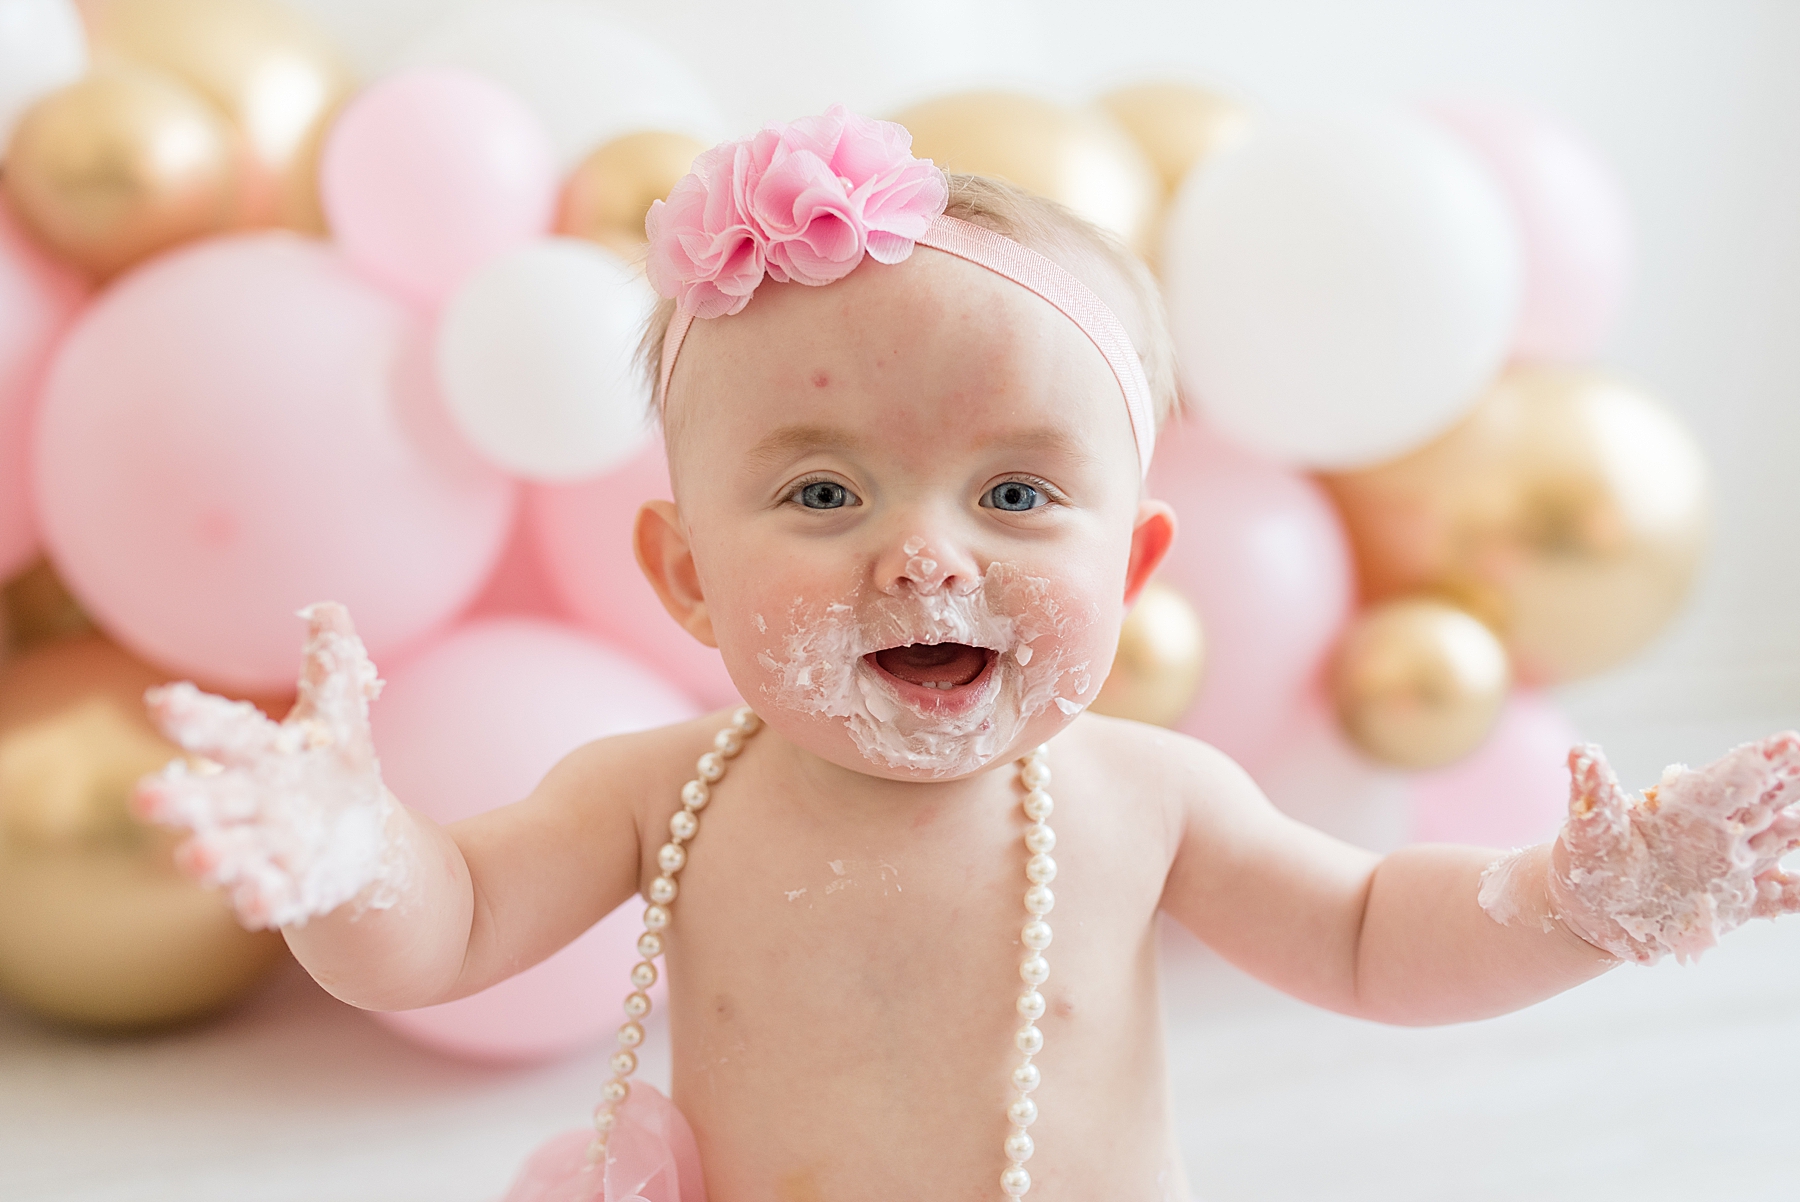 Little girl smiling with cake on her face and hands. Photographed by Dallas newborn photographer Lindsey Dutton Photography